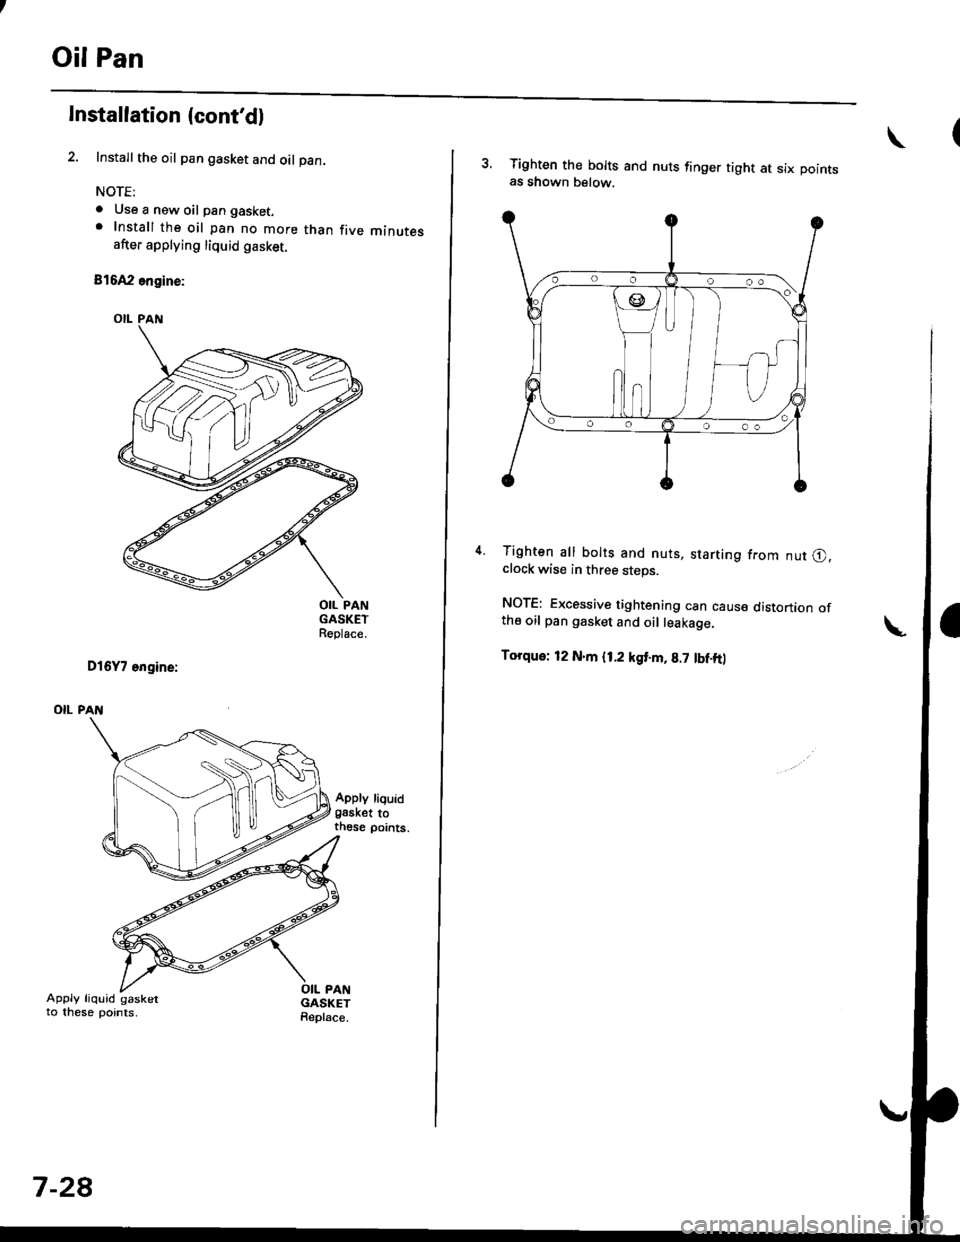 HONDA CIVIC 1996 6.G Workshop Manual Oil Pan
lnstallation (contdl
Install the oil pan gasket and oil pan
NOTE:
a Use a new oil pan gasket.. Install the oil pan no more than five minutesafter applying liquid gasket.
816A2 engine:
OIL PAN